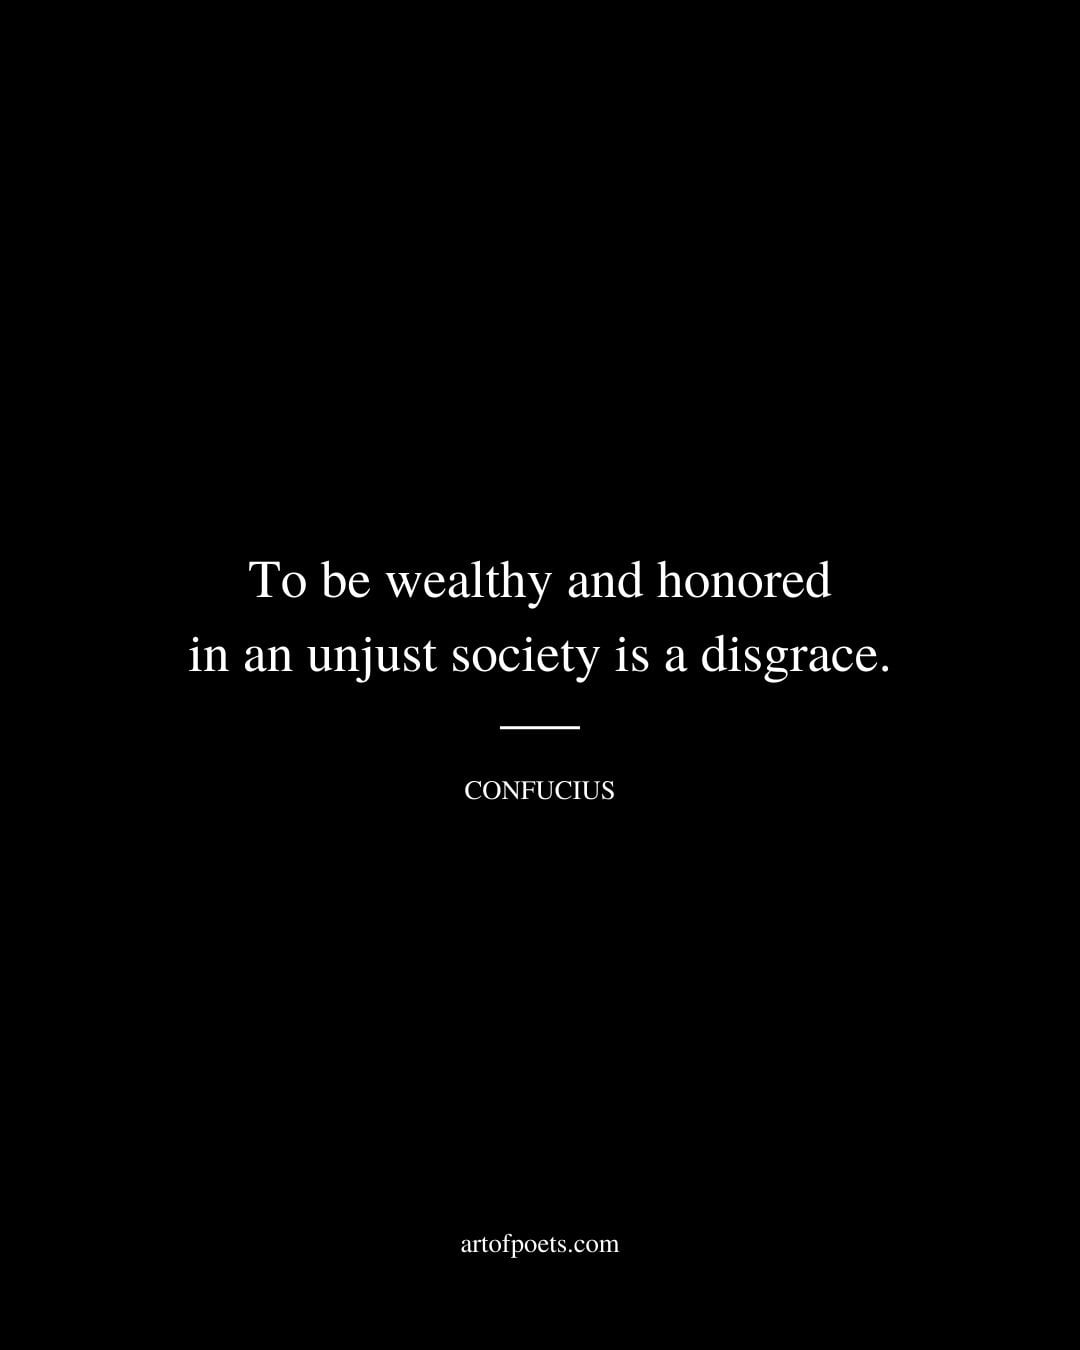 To be wealthy and honored in an unjust society is a disgrace